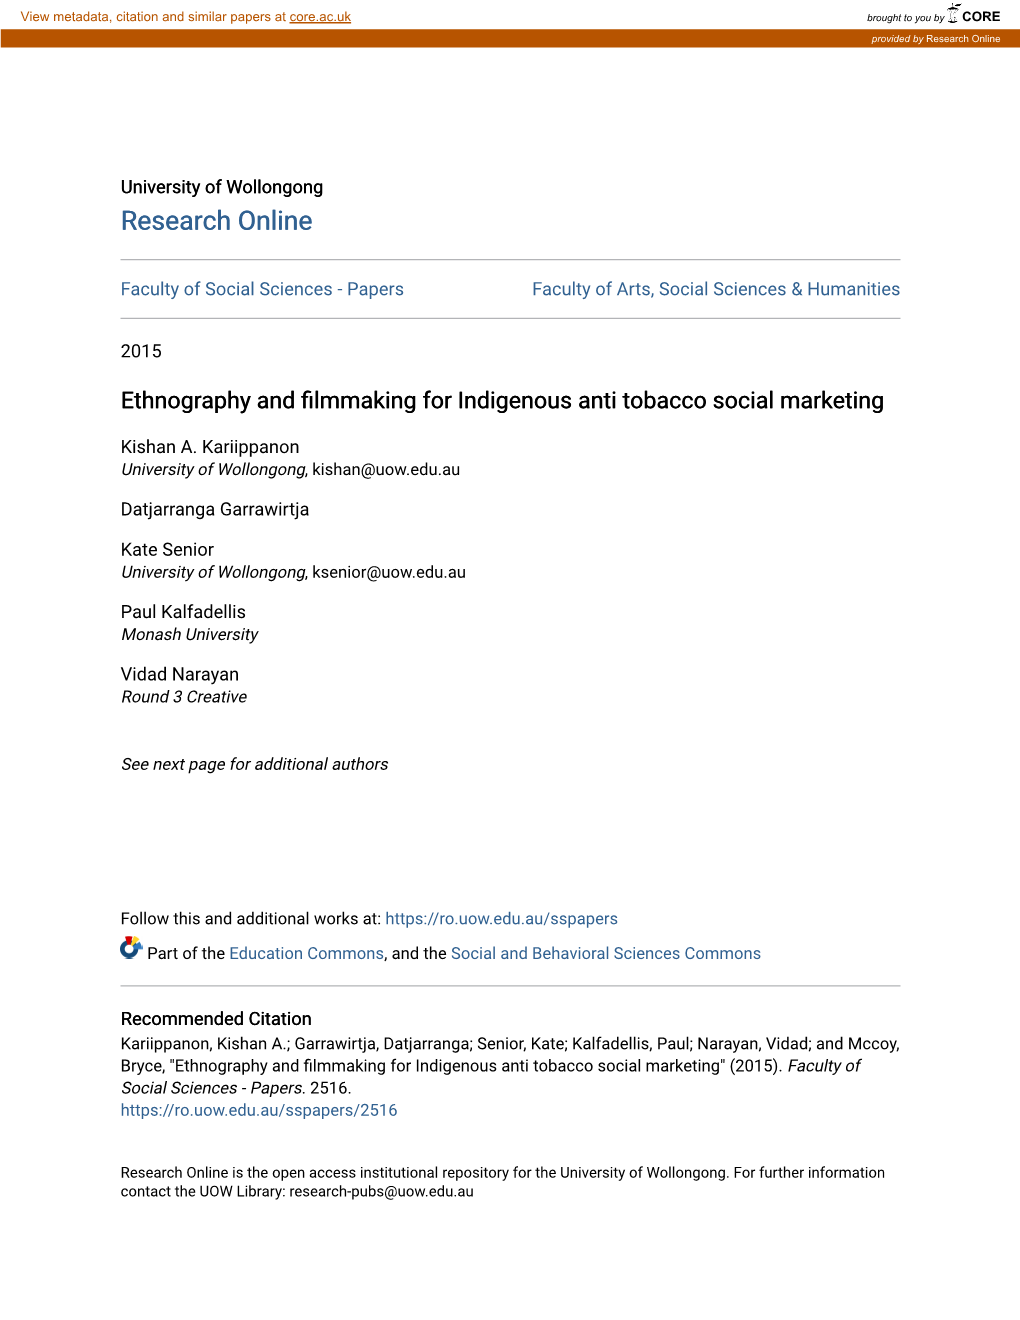 Ethnography and Filmmaking for Indigenous Anti Tobacco Social